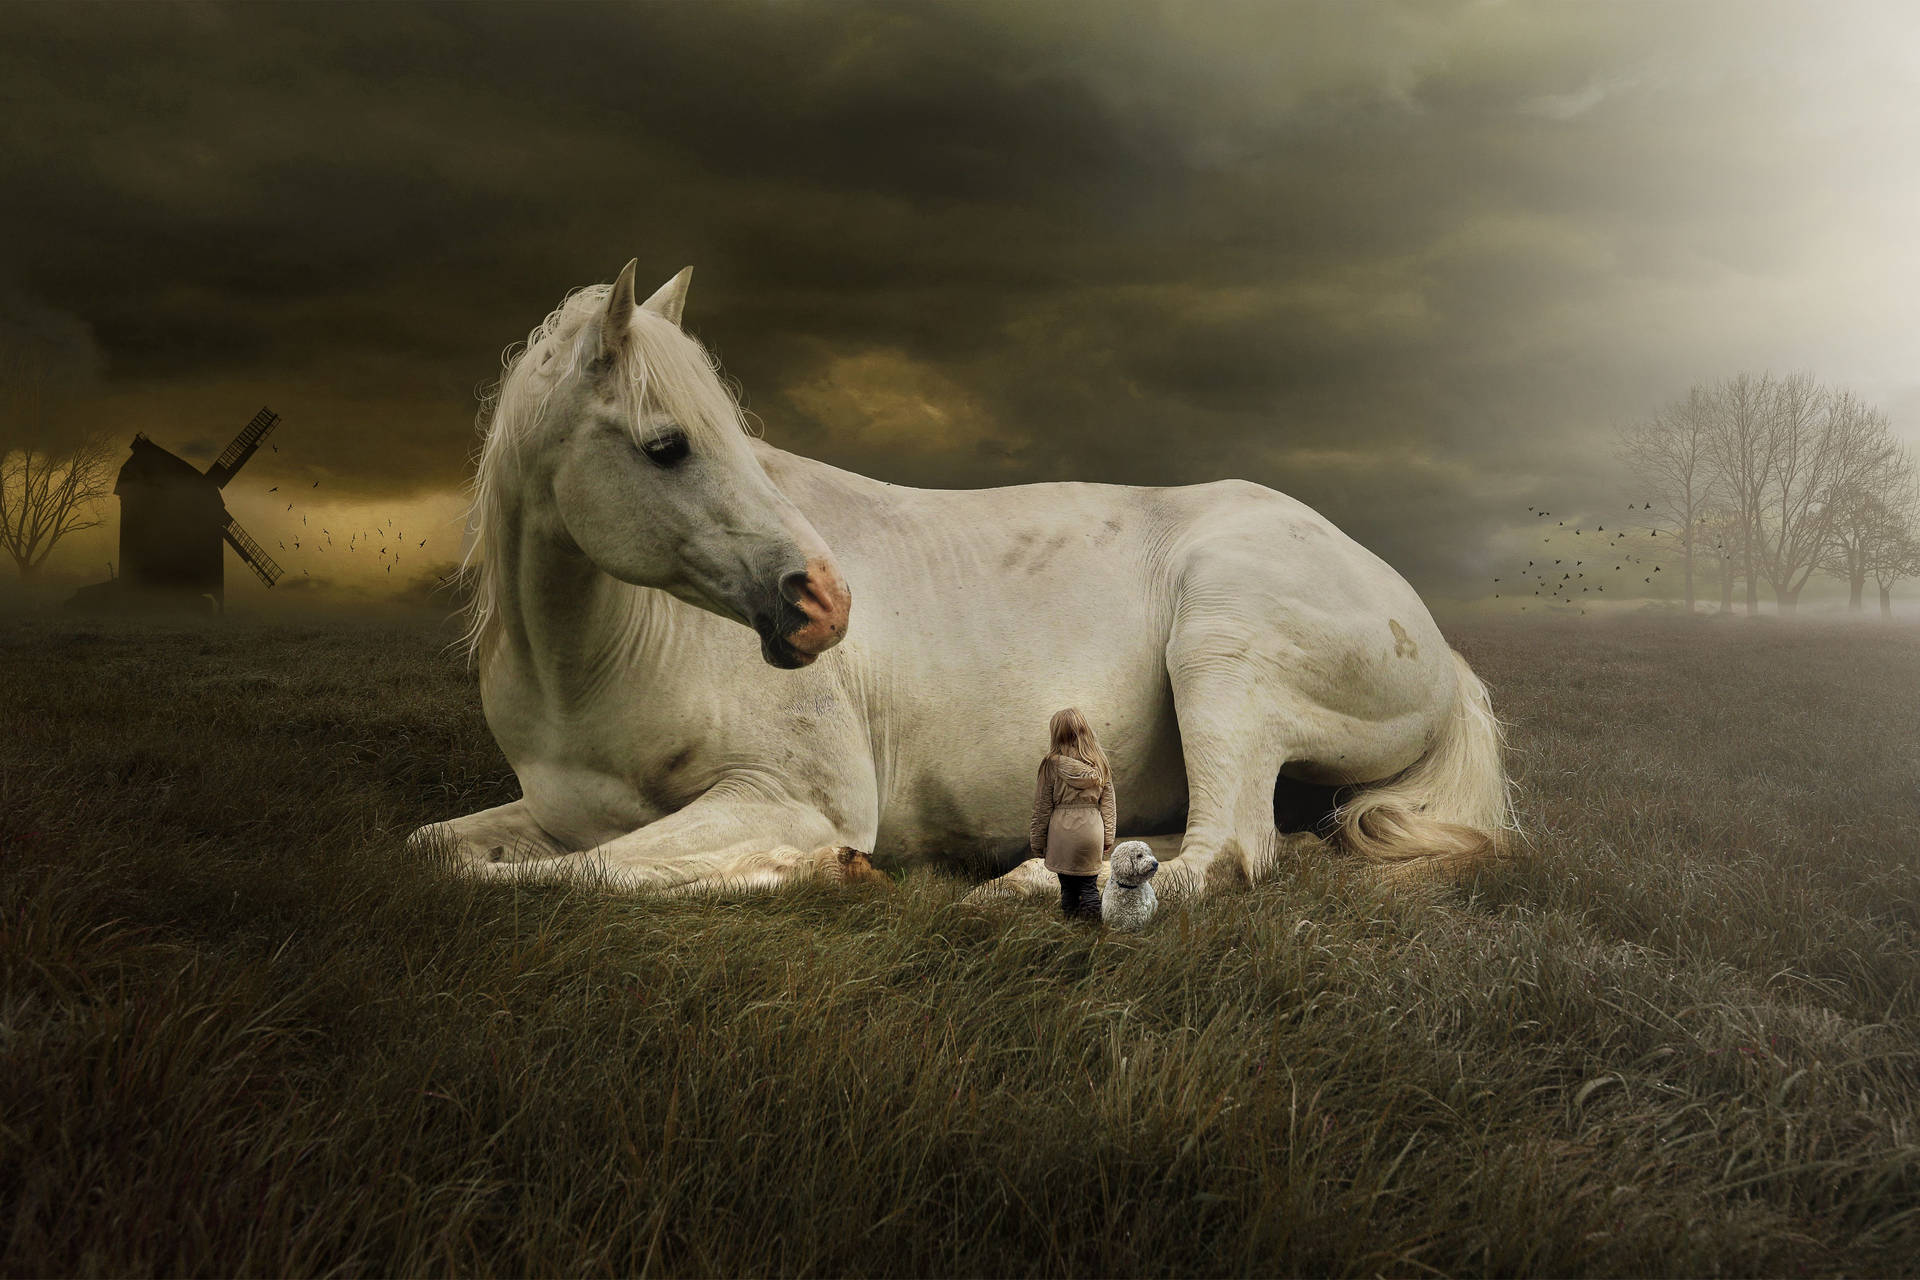 Giant Cute Horse With Girl And Puppy Wallpaper